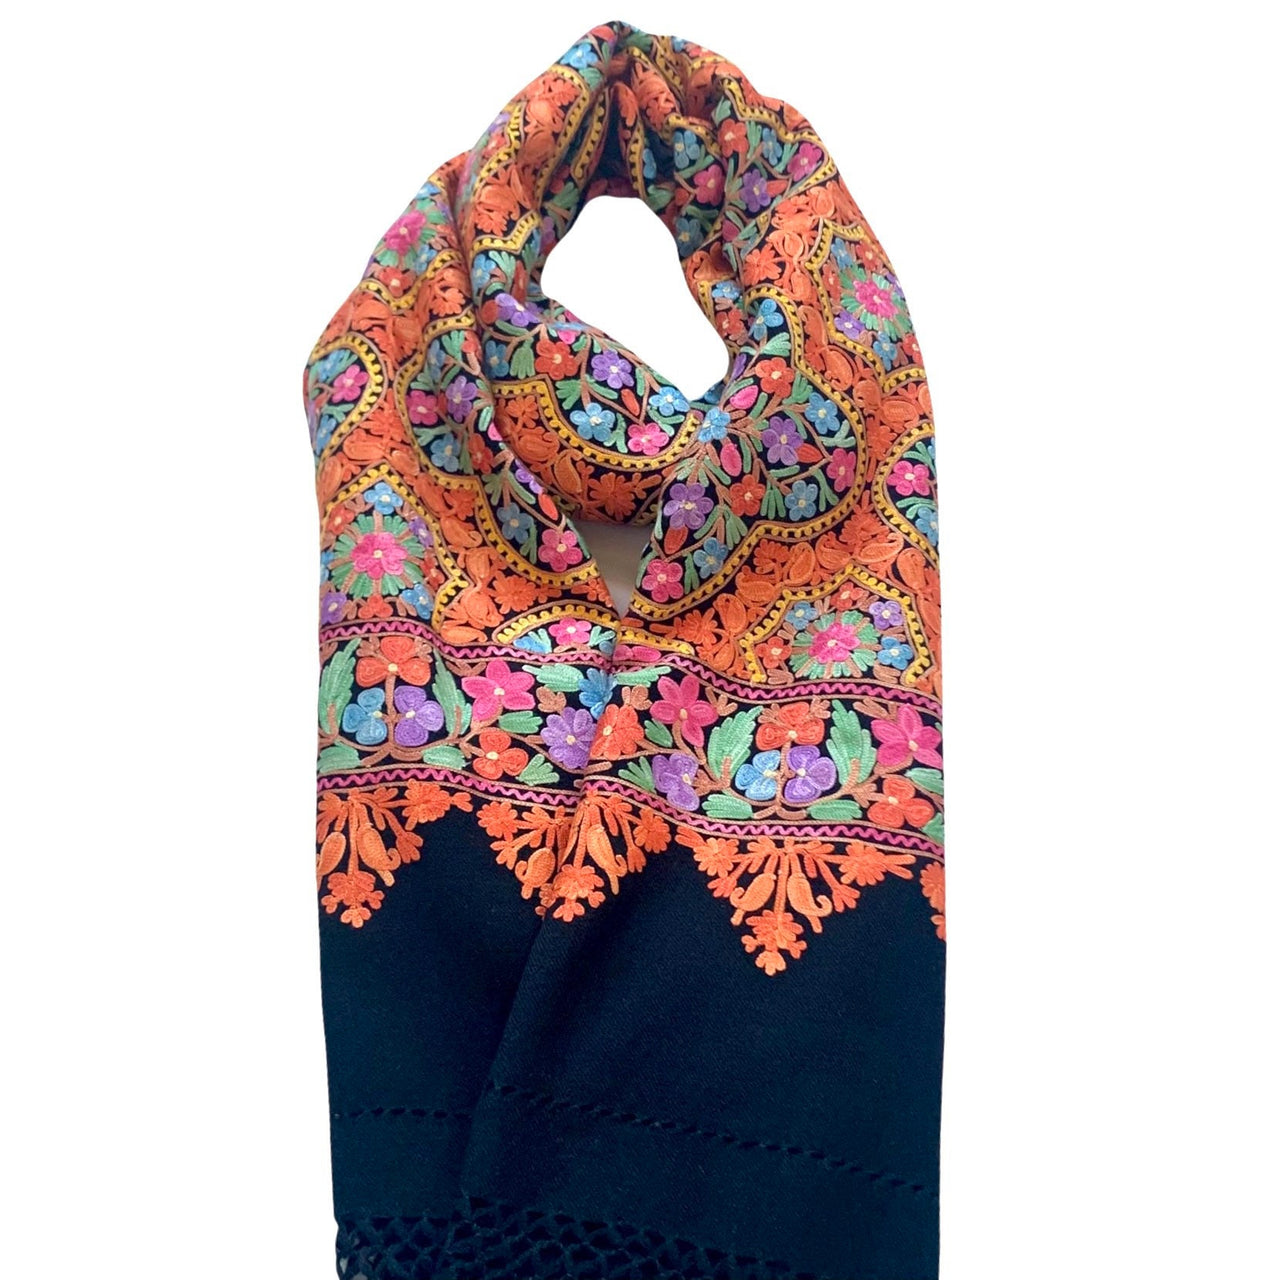 Stunning Floral Embroidered Wool Shawl Multi-Coloured Scarf Stole Women’s Wrap